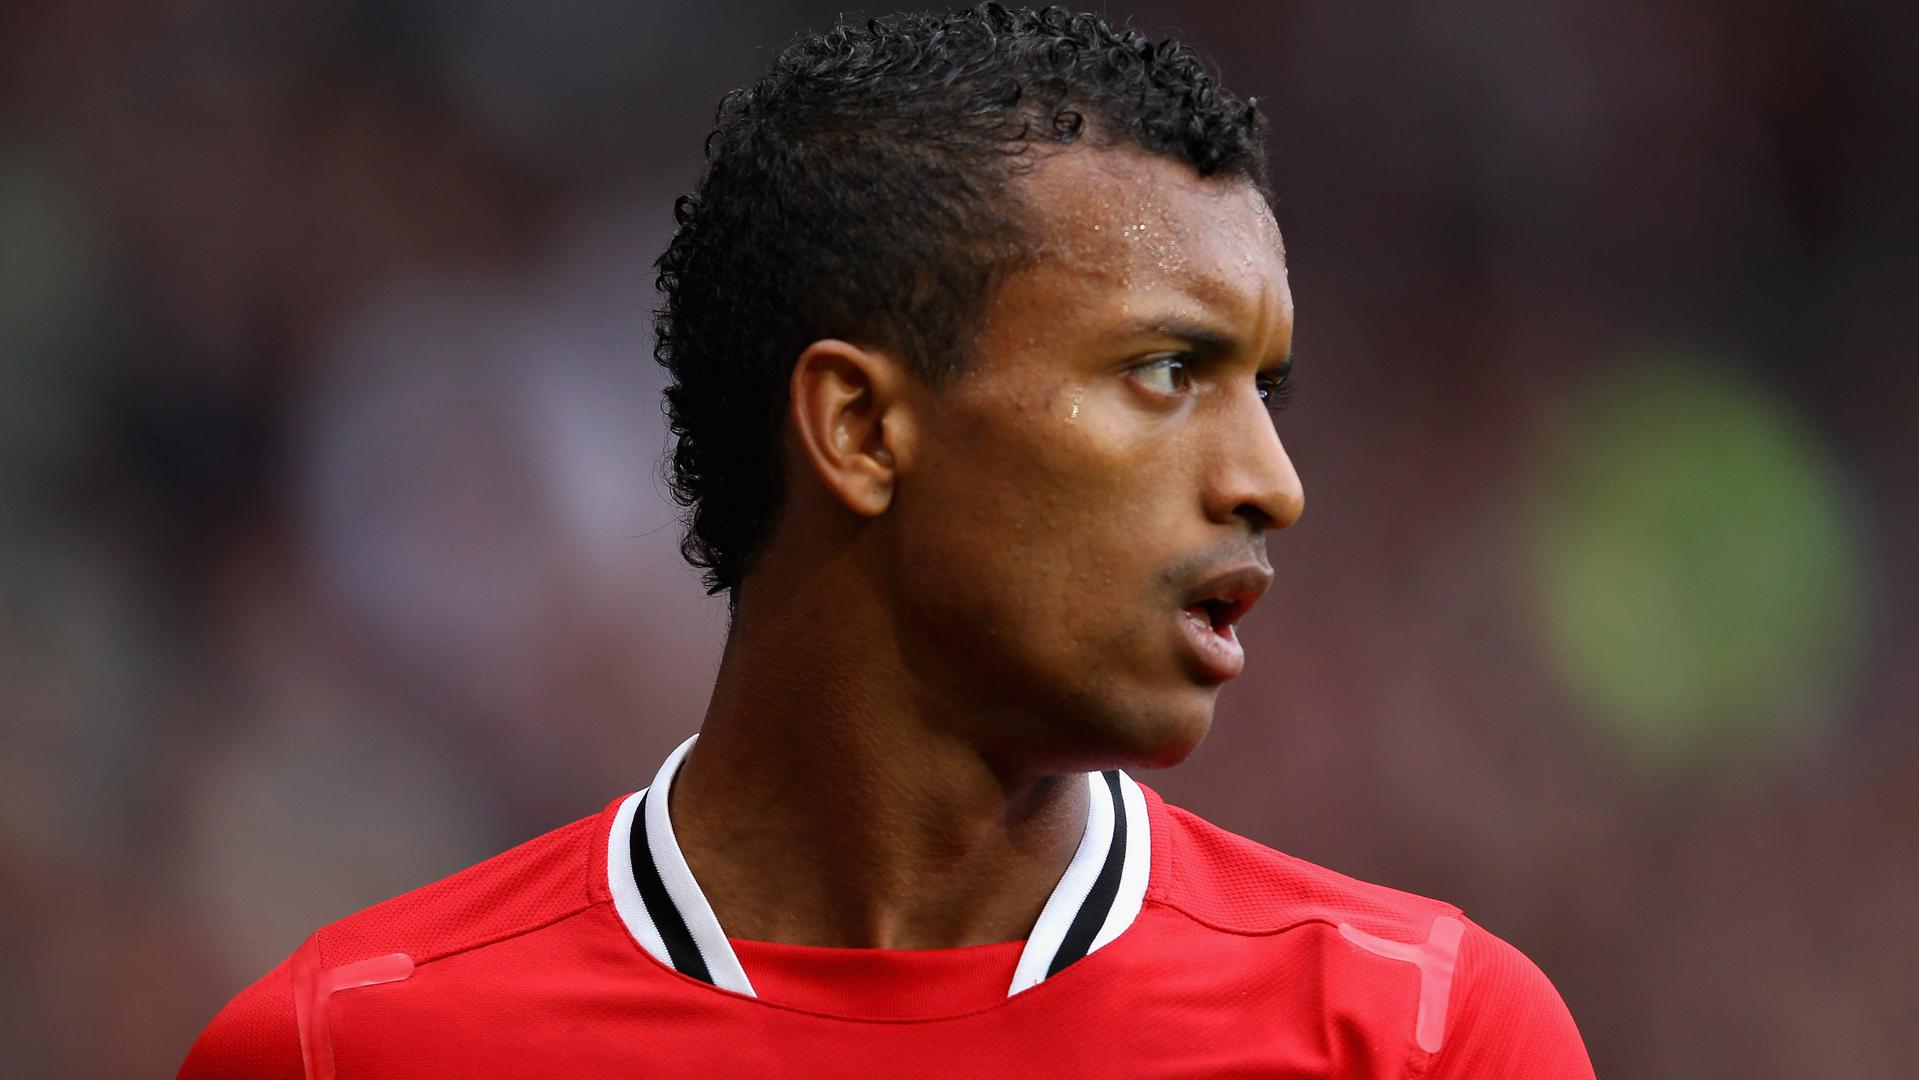 Top 10 goals scored by former Man Utd player Nani | Manchester United